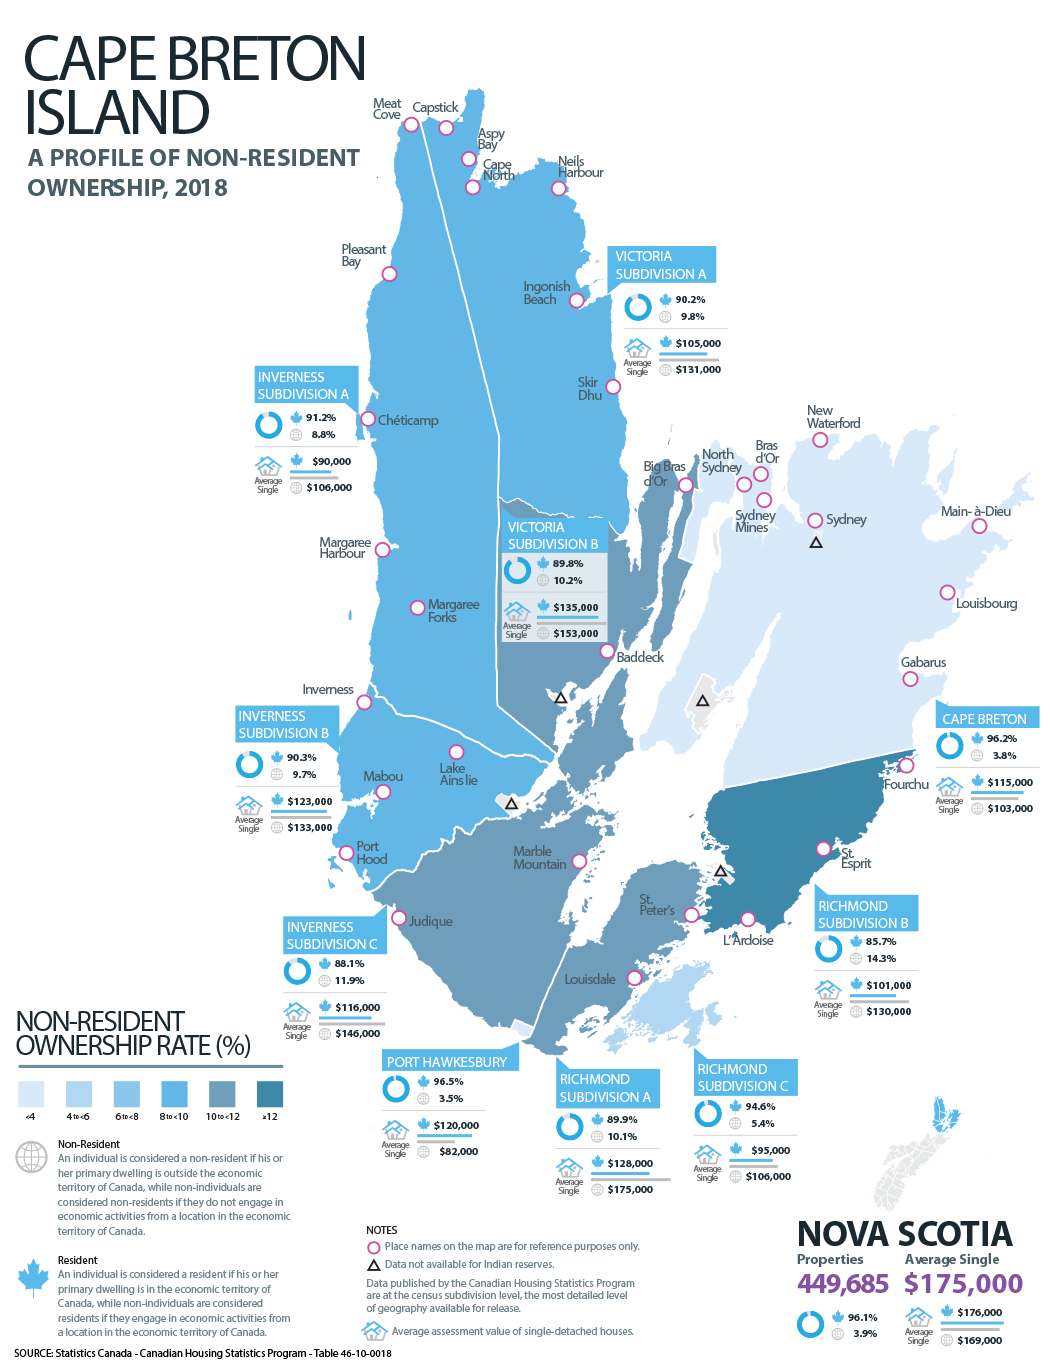 Thumbnail for Infographic 1: Cape Breton Island: A profile of non-resident ownership, 2018